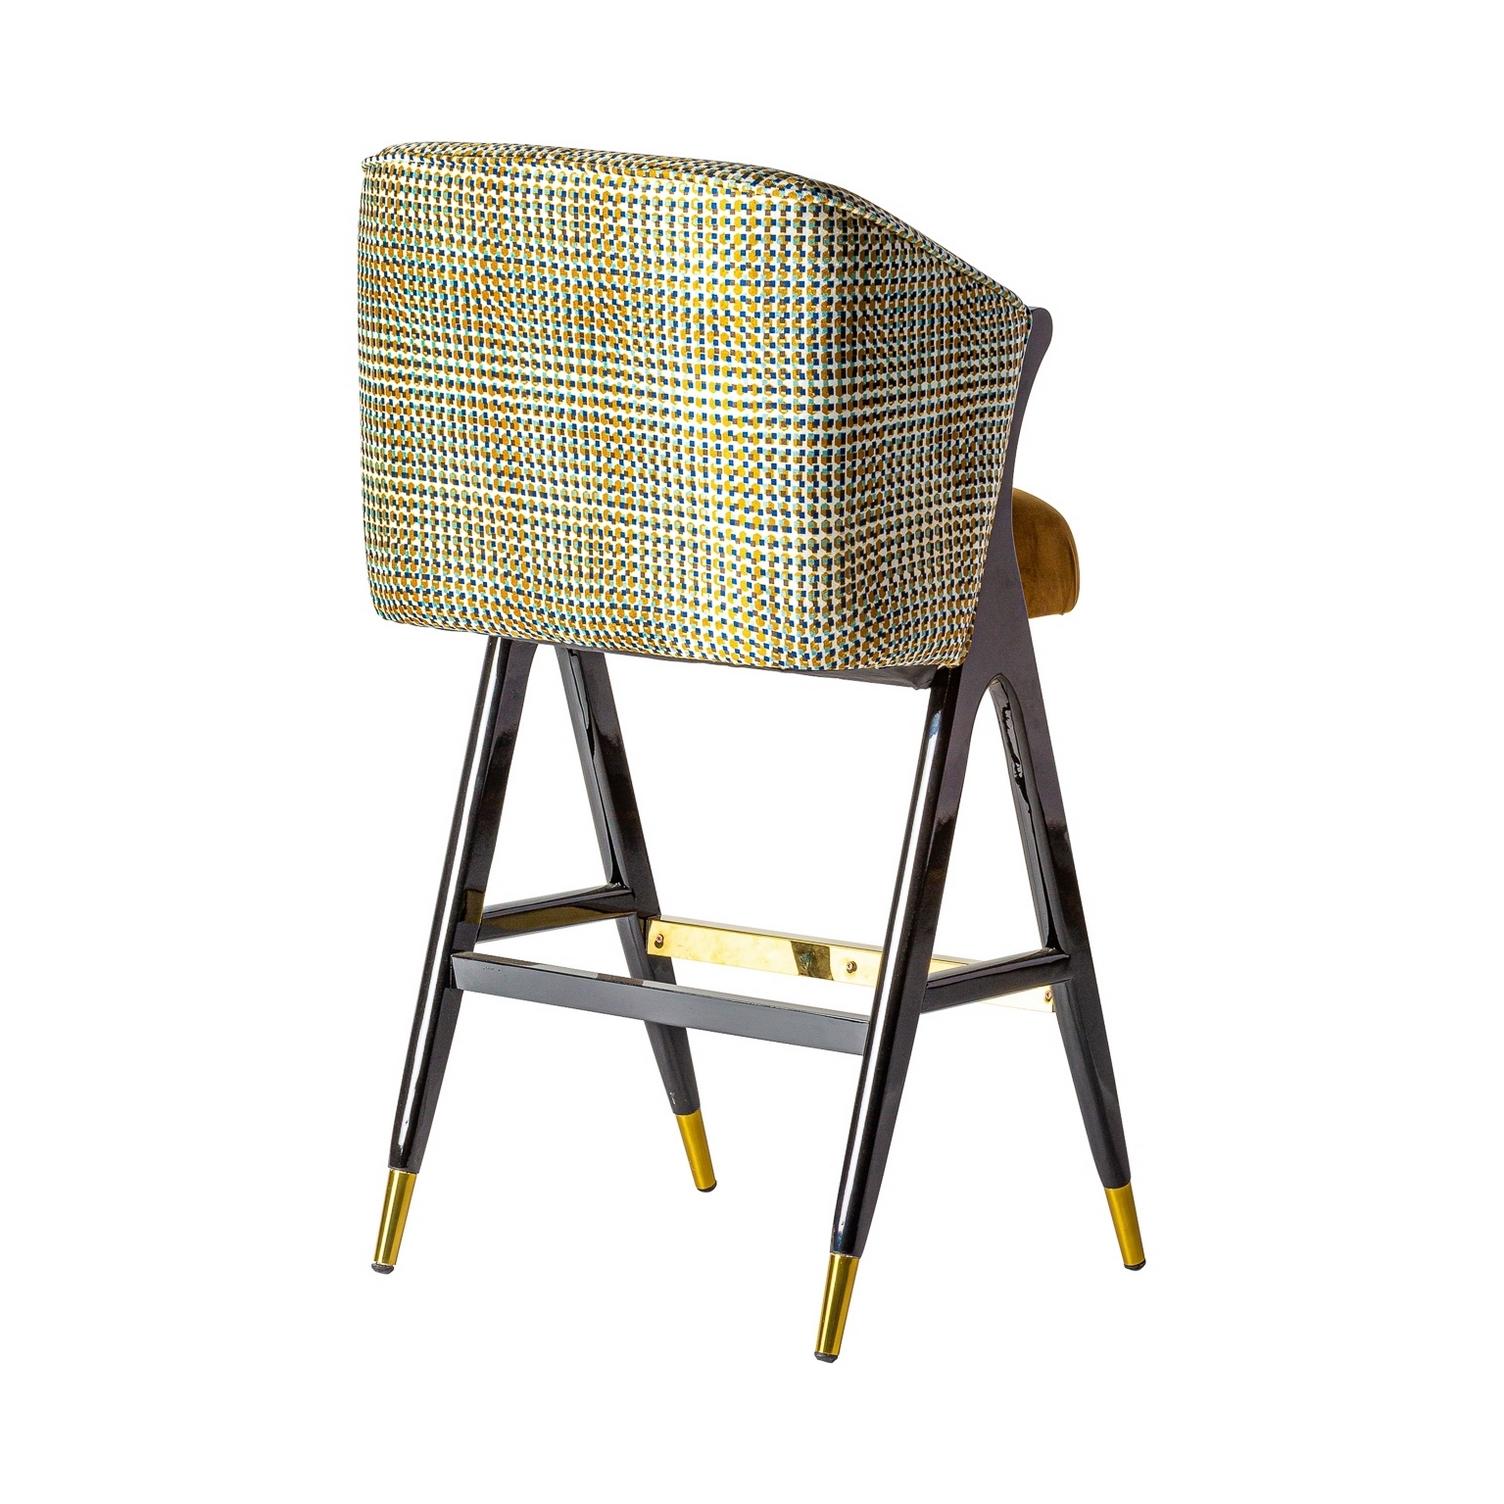 Black lacquer wooden feet with brass finish and psychedelic velvet bar stool in a Mid-Century Modern style.